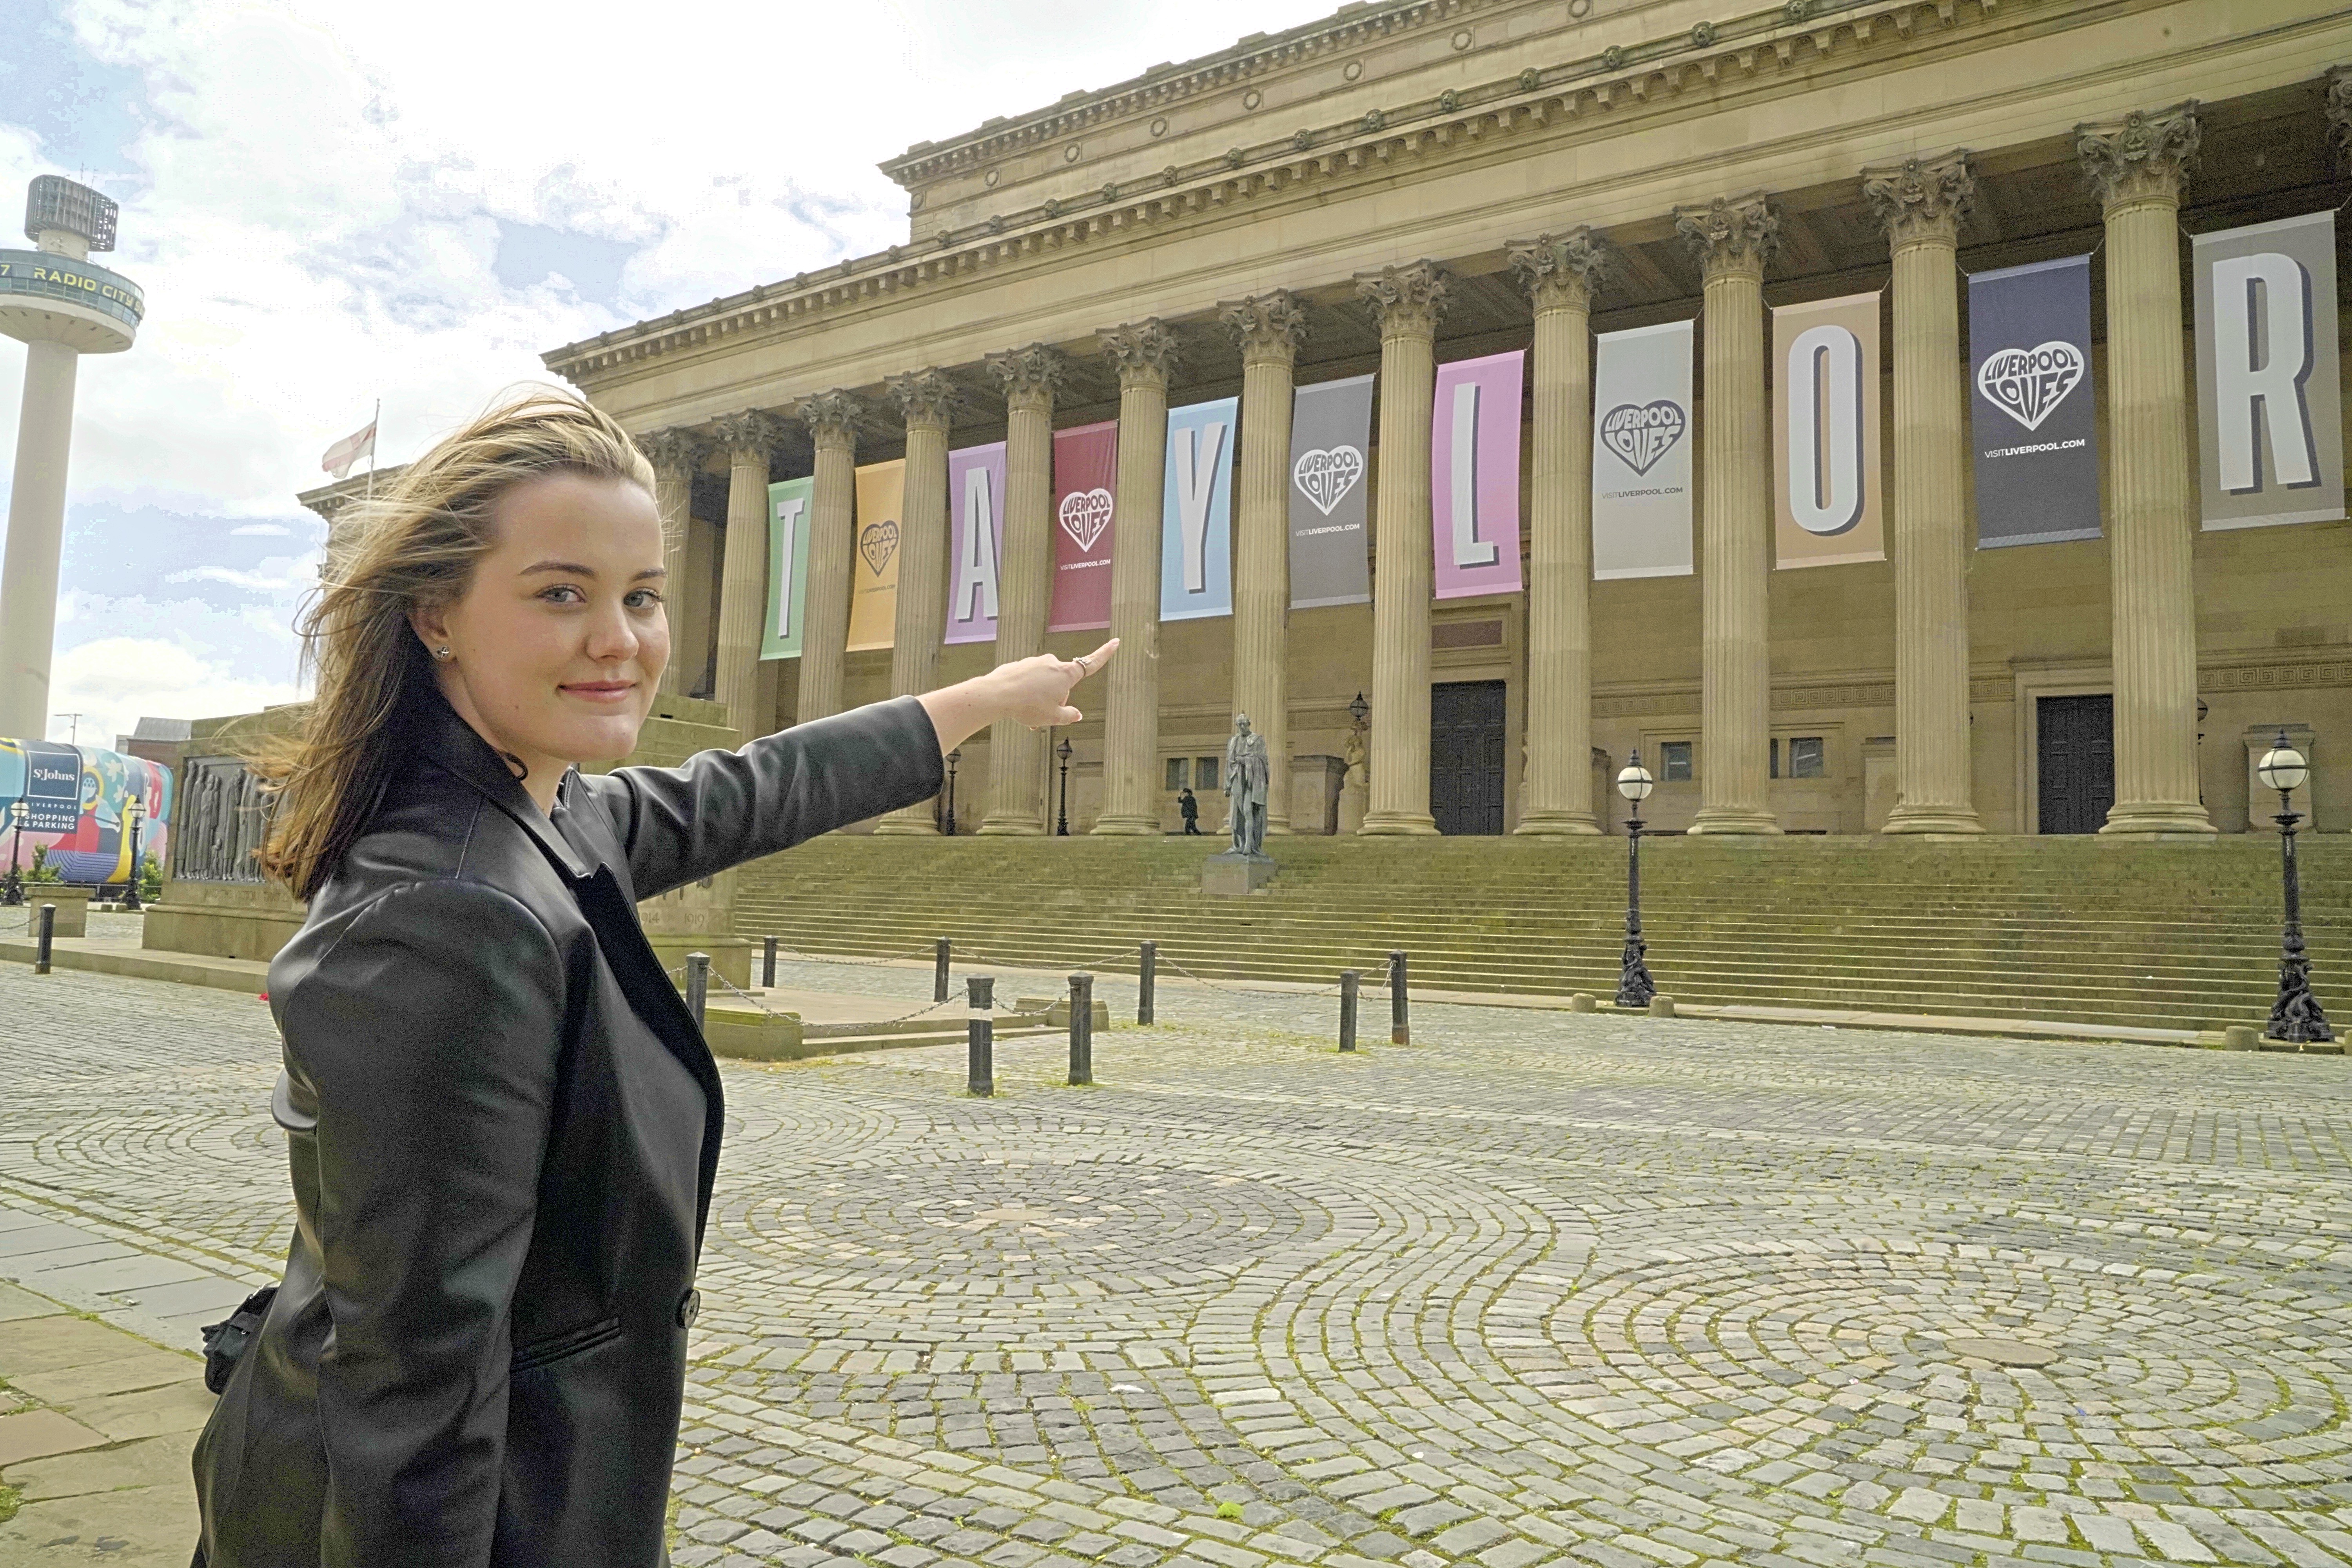 A girl points to the Taylor swift banner on St George's Hall